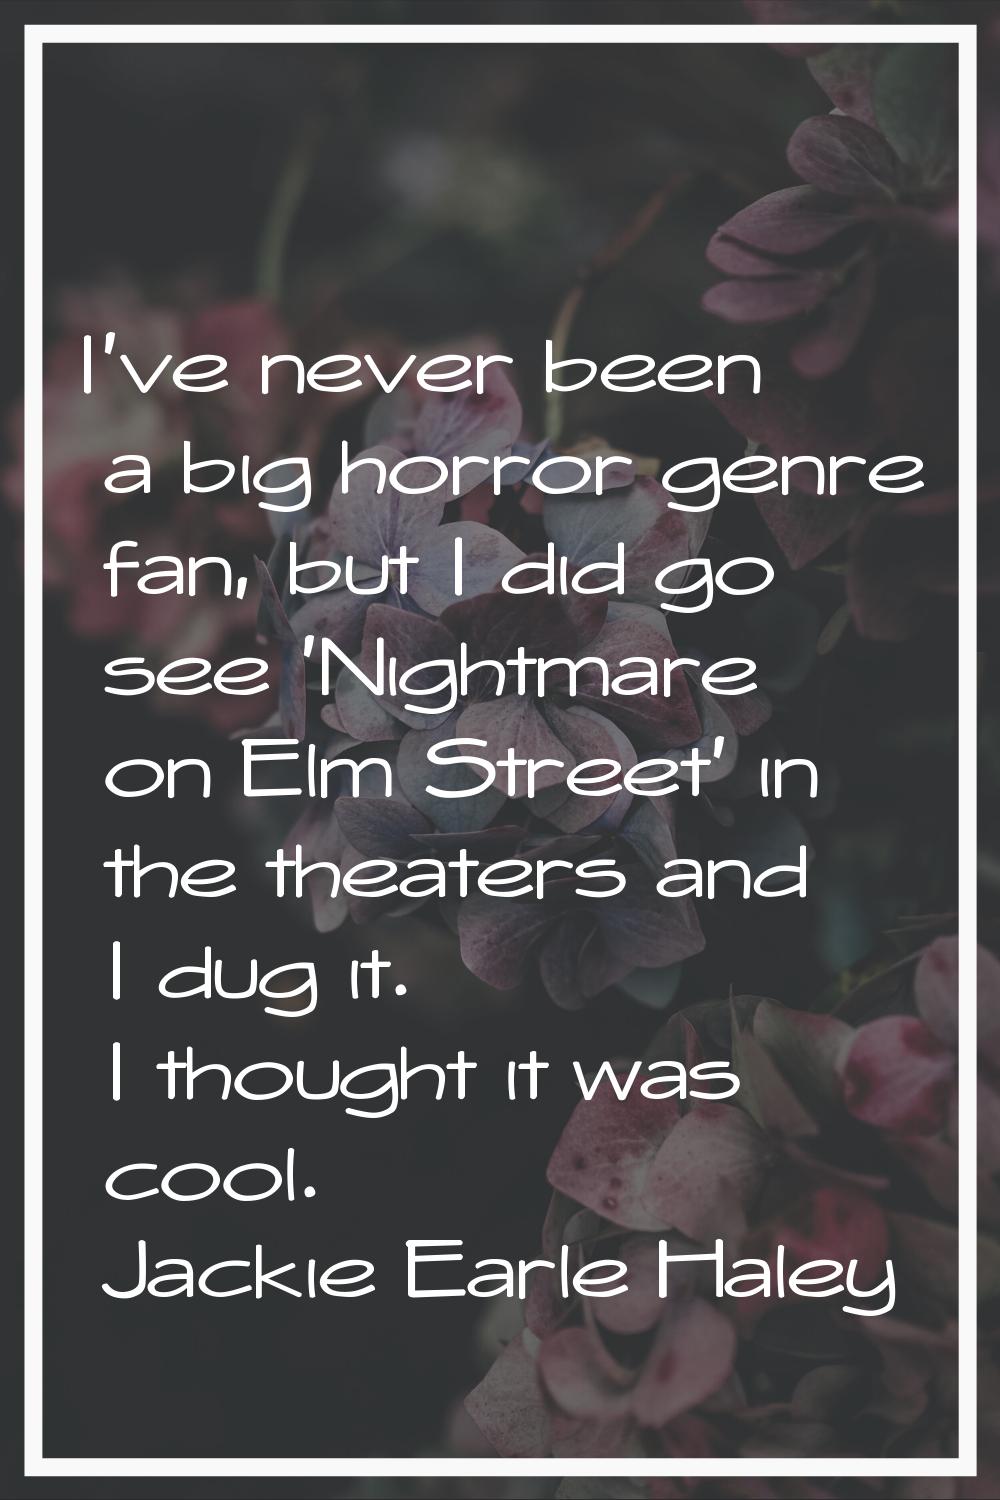 I've never been a big horror genre fan, but I did go see 'Nightmare on Elm Street' in the theaters 